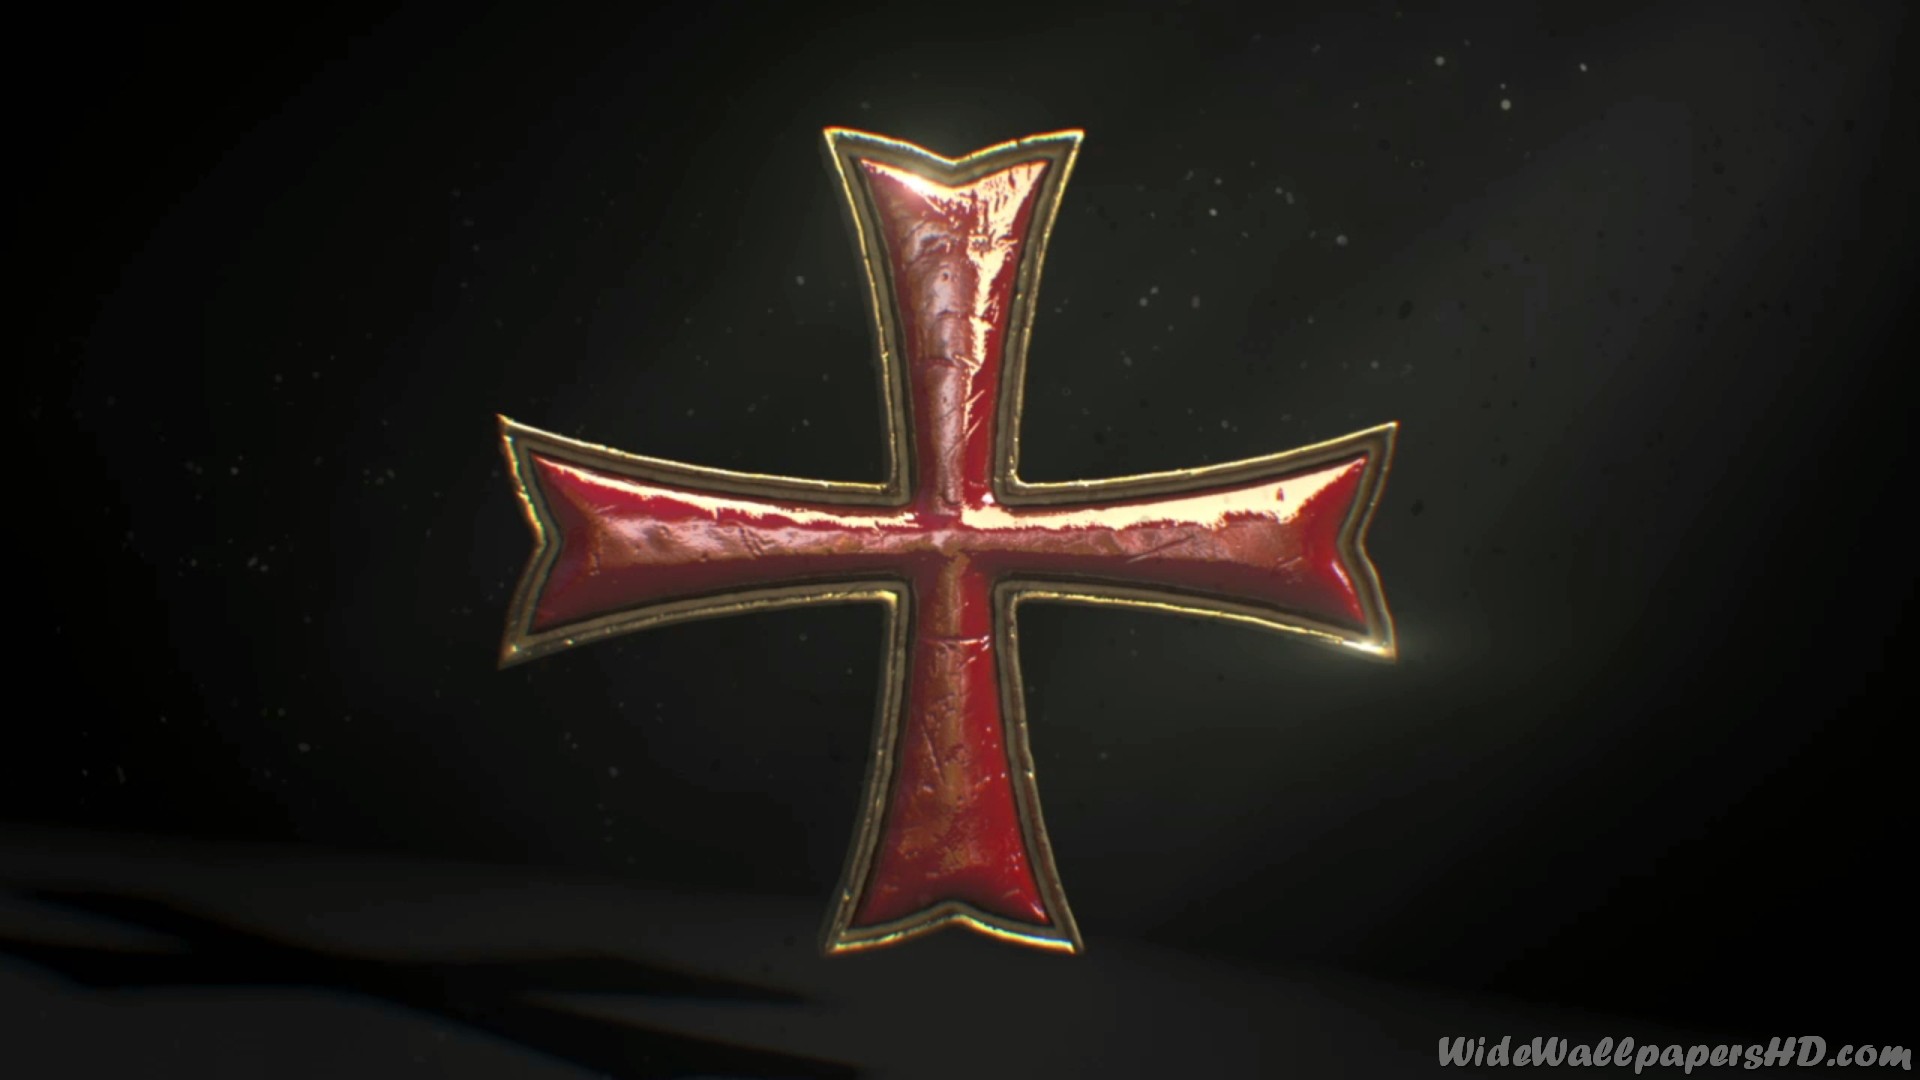 Templars For Thousands Of Years Assassins Creed 1080p Wallpaper Jpg